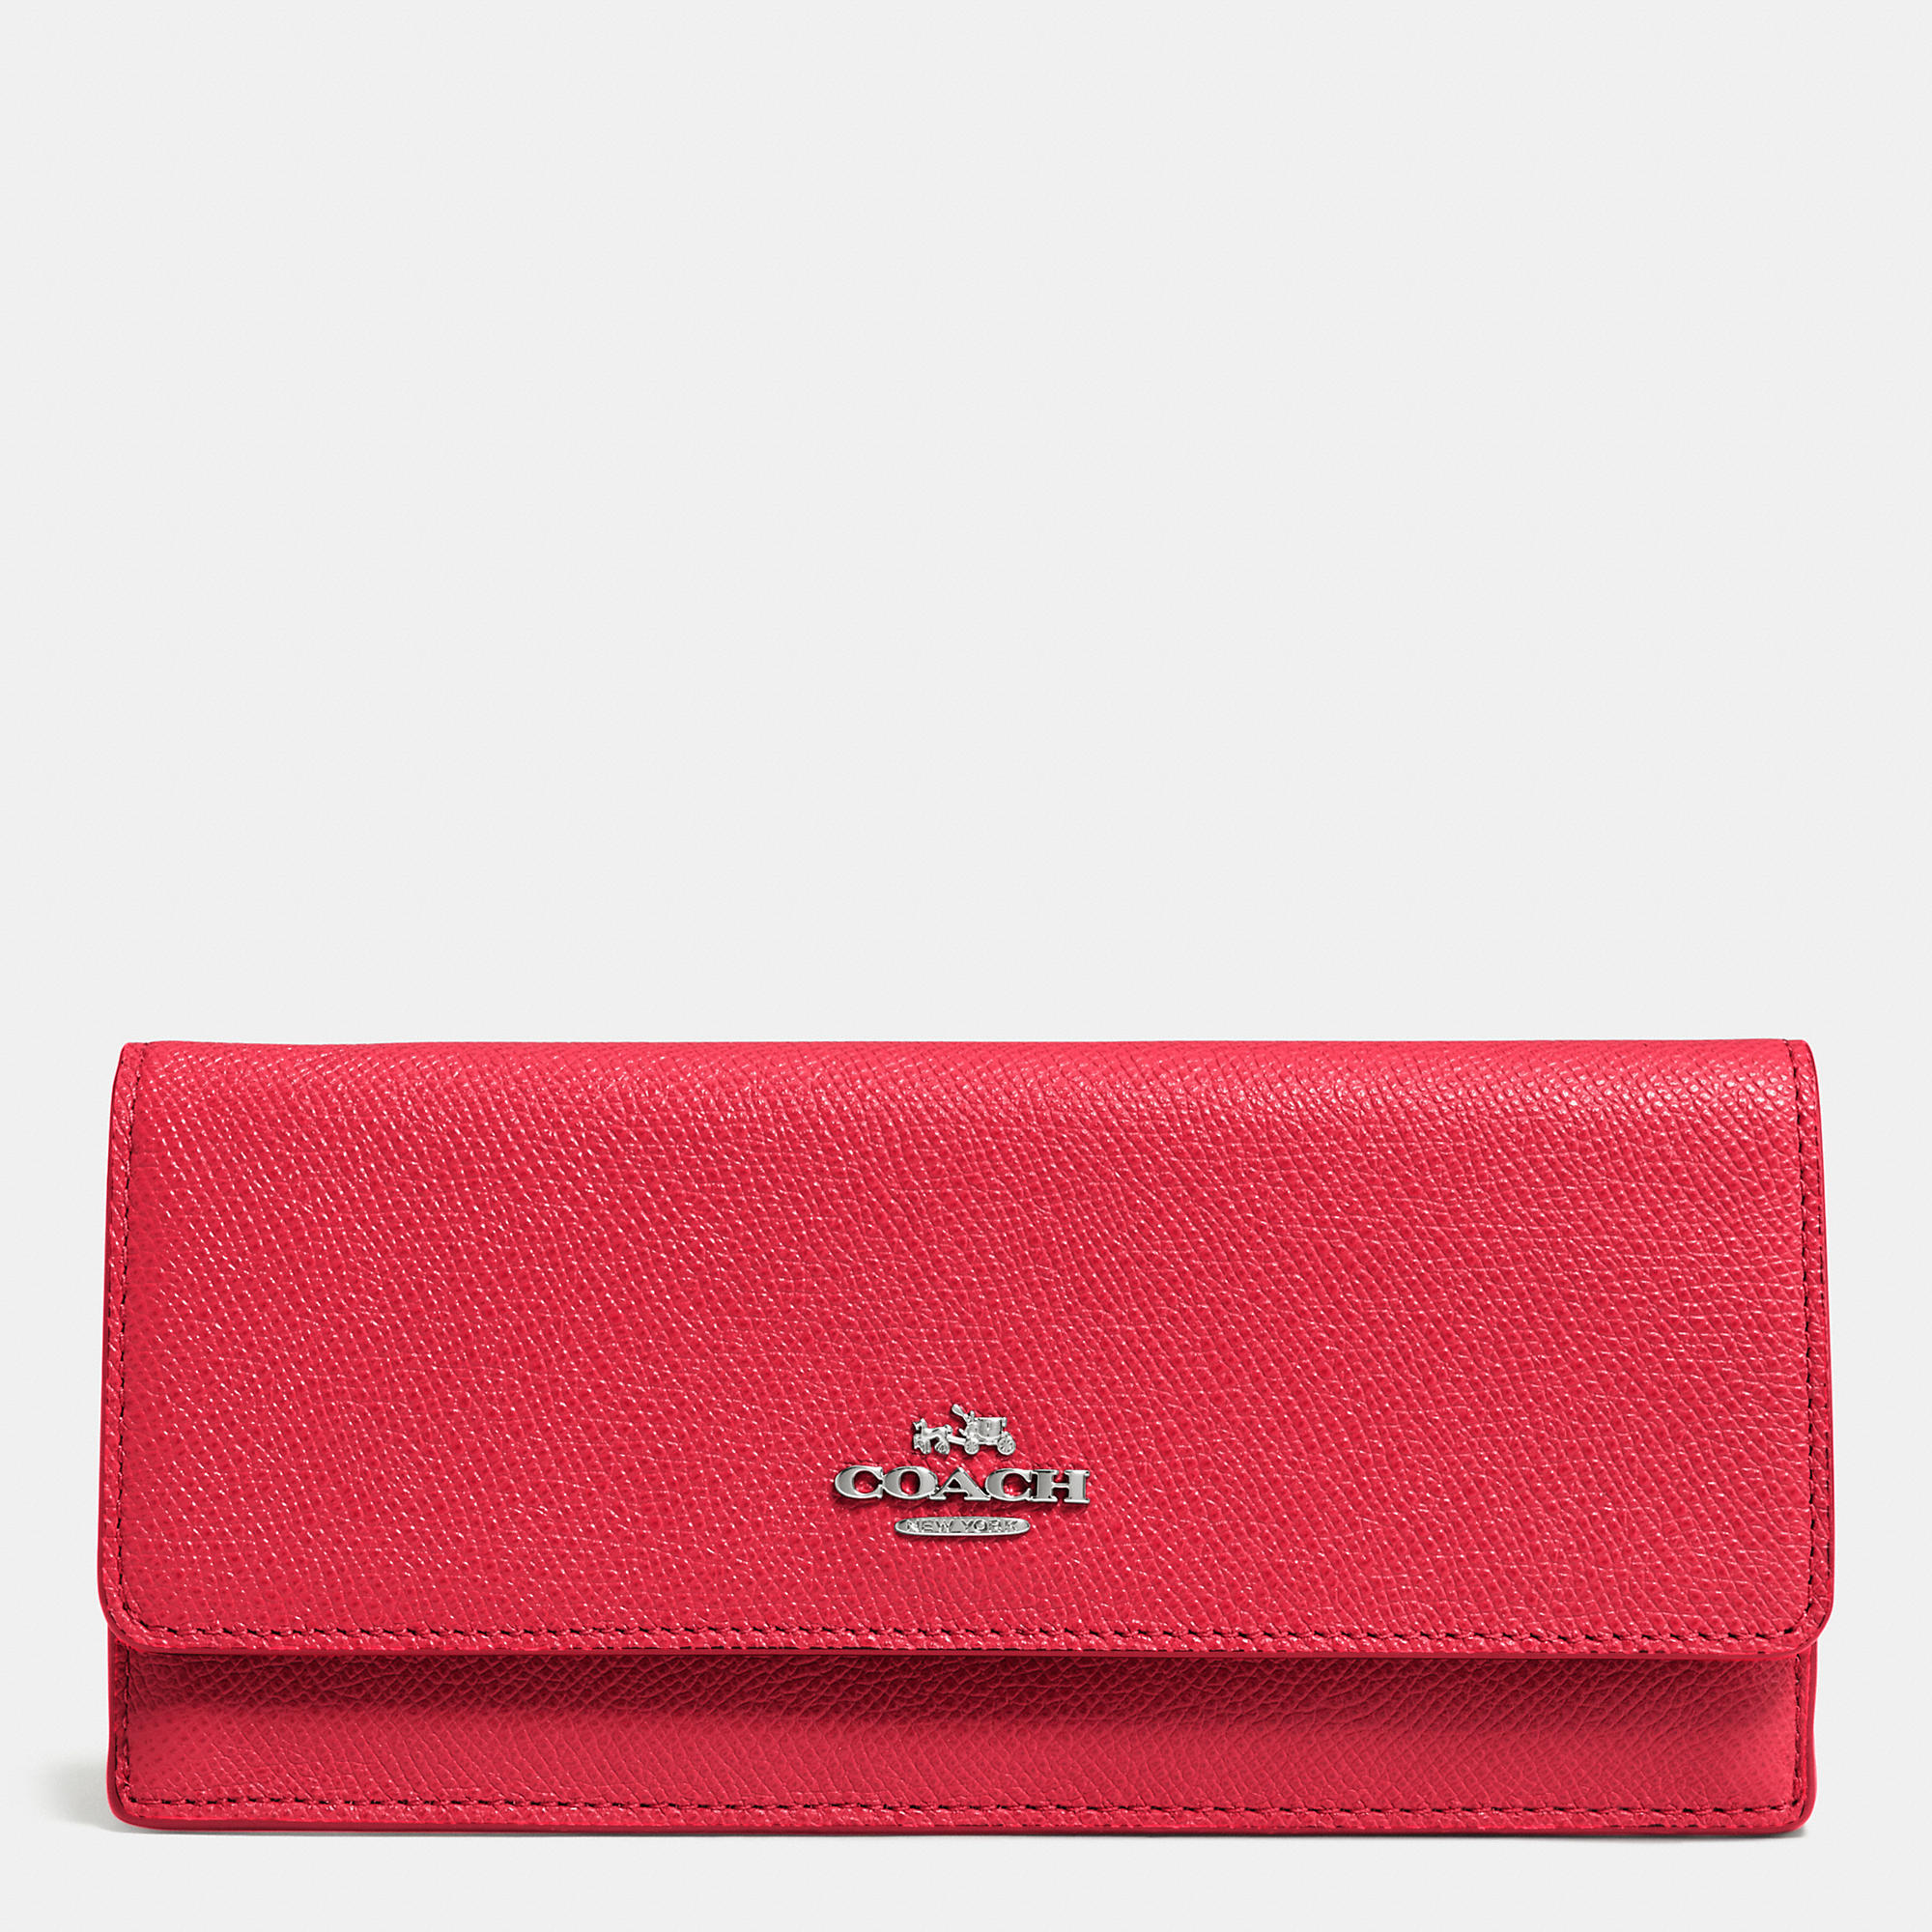 Worldwide Hot Sale Coach Soft Wallet In Embossed Textured Leather | Coach Outlet Canada